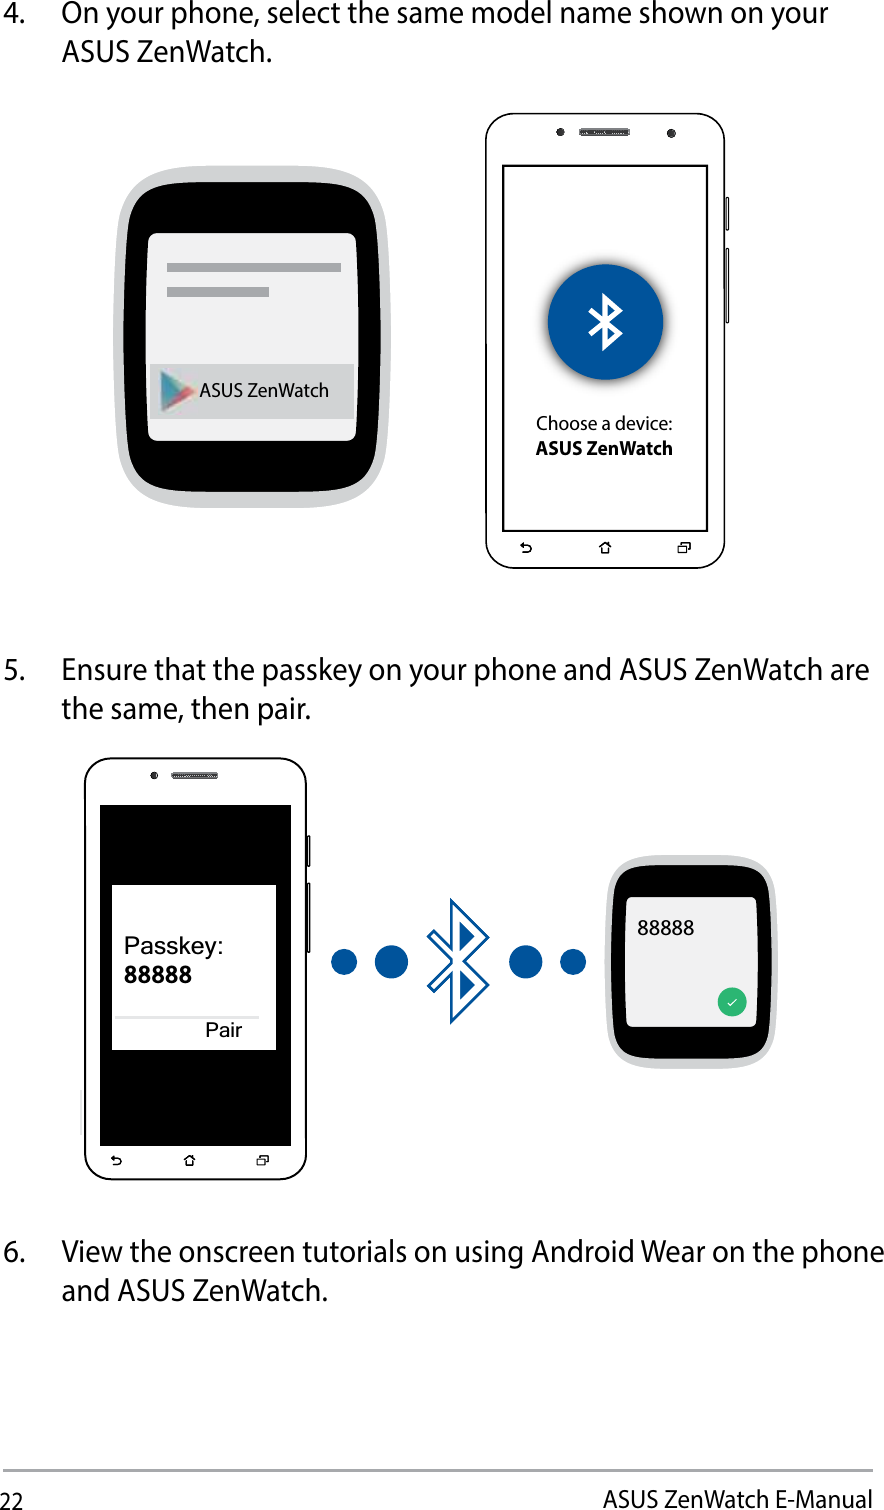 22ASUS ZenWatch E-Manual4.  On your phone, select the same model name shown on your ASUS ZenWatch. ASUS ZenWatchChoose a device:ASUS ZenWatch5.  Ensure that the passkey on your phone and ASUS ZenWatch are the same, then pair.88888Passkey:88888Pair6.  View the onscreen tutorials on using Android Wear on the phone and ASUS ZenWatch. 